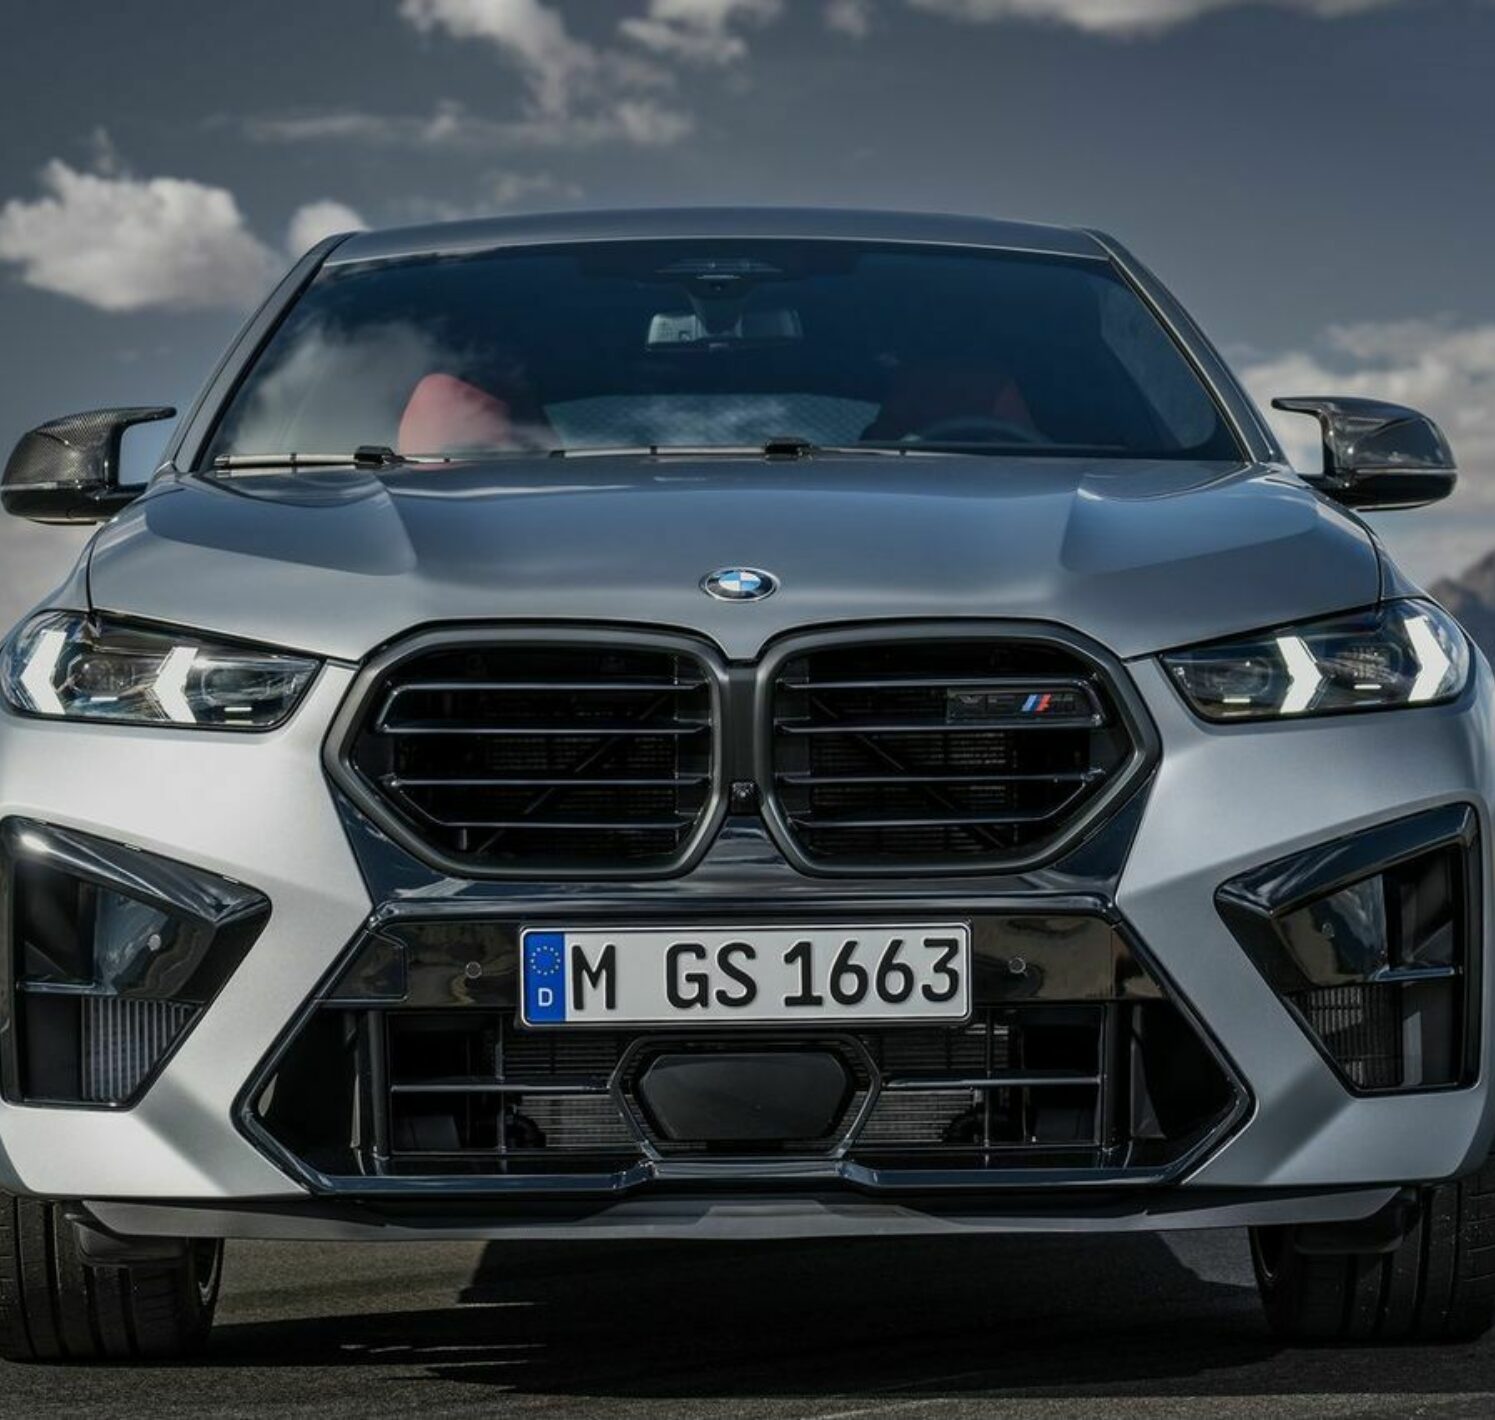 https://autofilter.sk/assets/images/x6-m-competition/gallery/bmw-x6-m-competition-6-galeria.jpg - obrazok